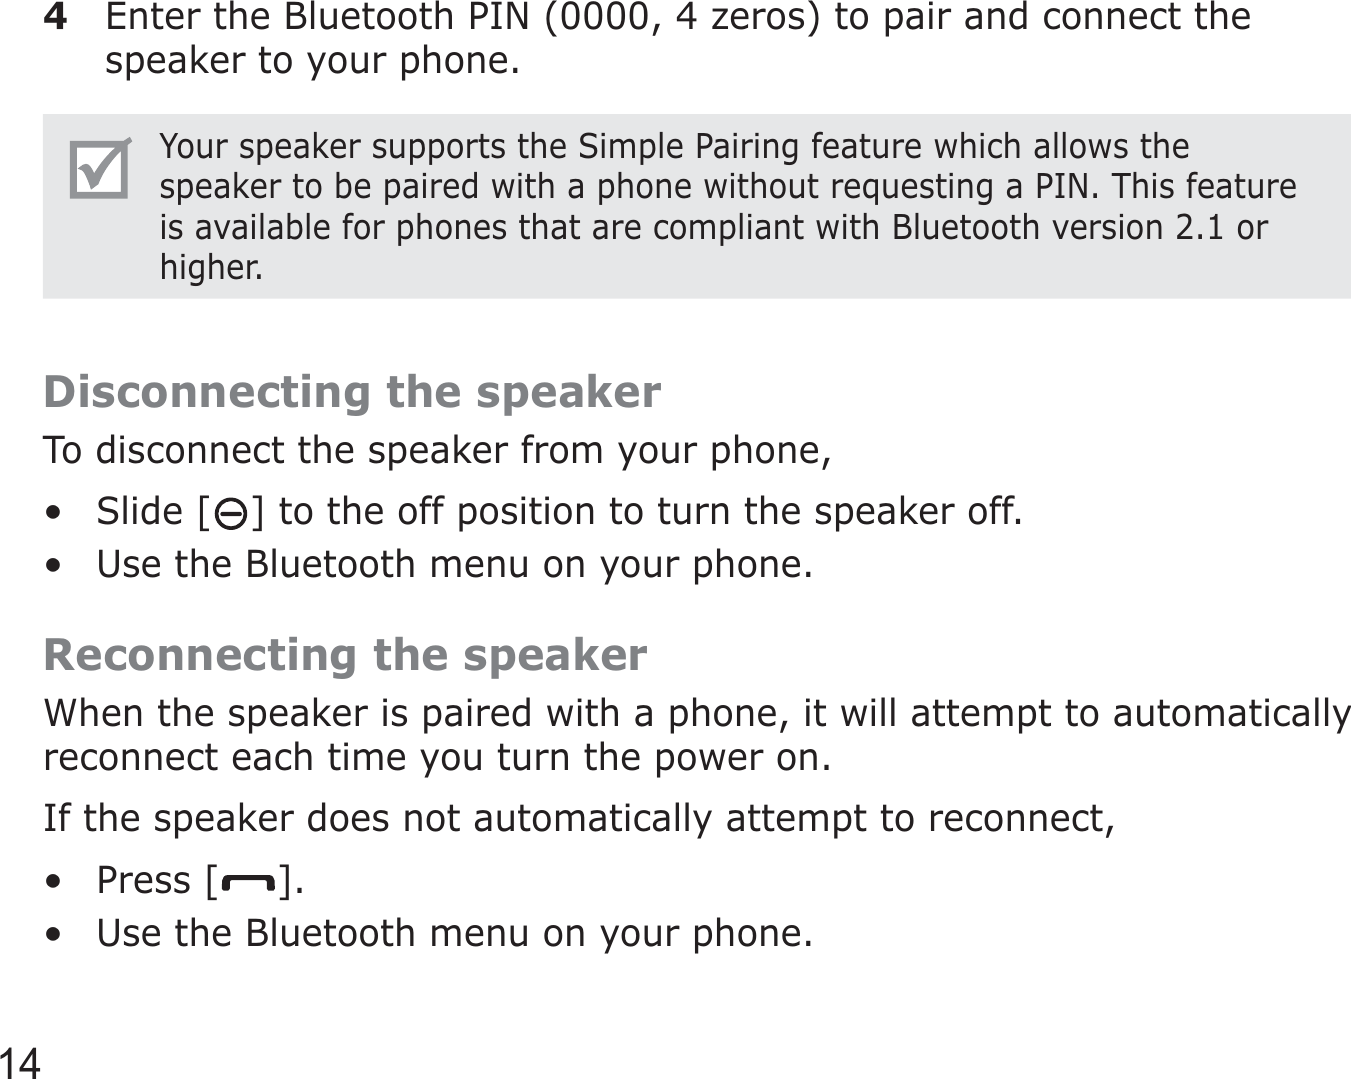 144  Enter the Bluetooth PIN (0000, 4 zeros) to pair and connect the speaker to your phone.Your speaker supports the Simple Pairing feature which allows the speaker to be paired with a phone without requesting a PIN. This feature is available for phones that are compliant with Bluetooth version 2.1 or higher.Disconnecting the speakerTo disconnect the speaker from your phone,Slide [ ] to the off position to turn the speaker off.Use the Bluetooth menu on your phone.Reconnecting the speakerWhen the speaker is paired with a phone, it will attempt to automatically reconnect each time you turn the power on.If the speaker does not automatically attempt to reconnect,Press [ ].Use the Bluetooth menu on your phone.••••